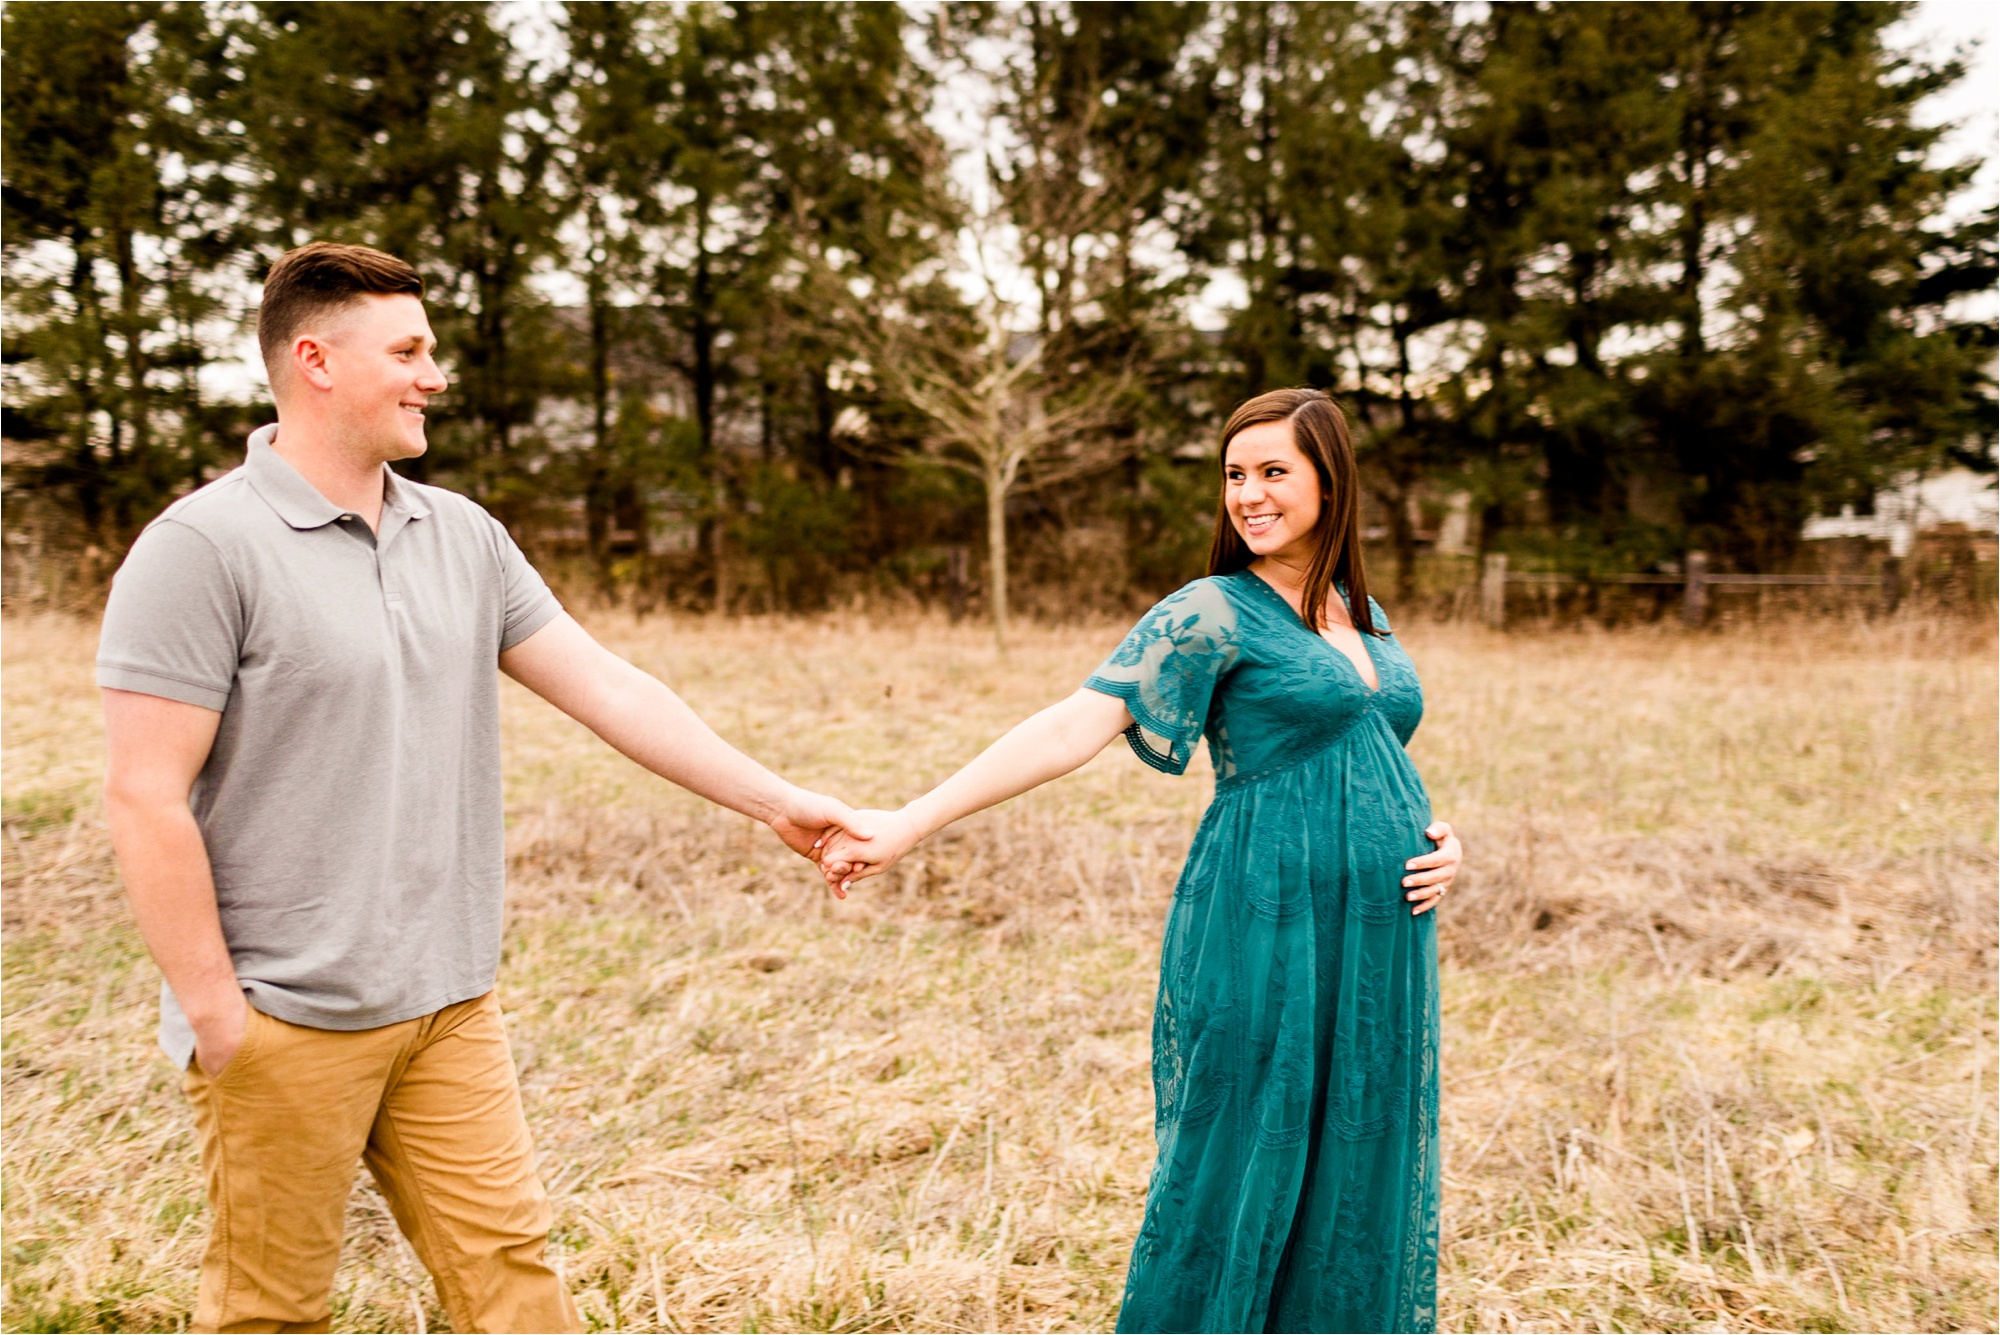 Caitlin and Luke Photography, Illinois Wedding Photographers, Chicago Wedding Photographers, Bloomington Normal Maternity Session_9456.jpg